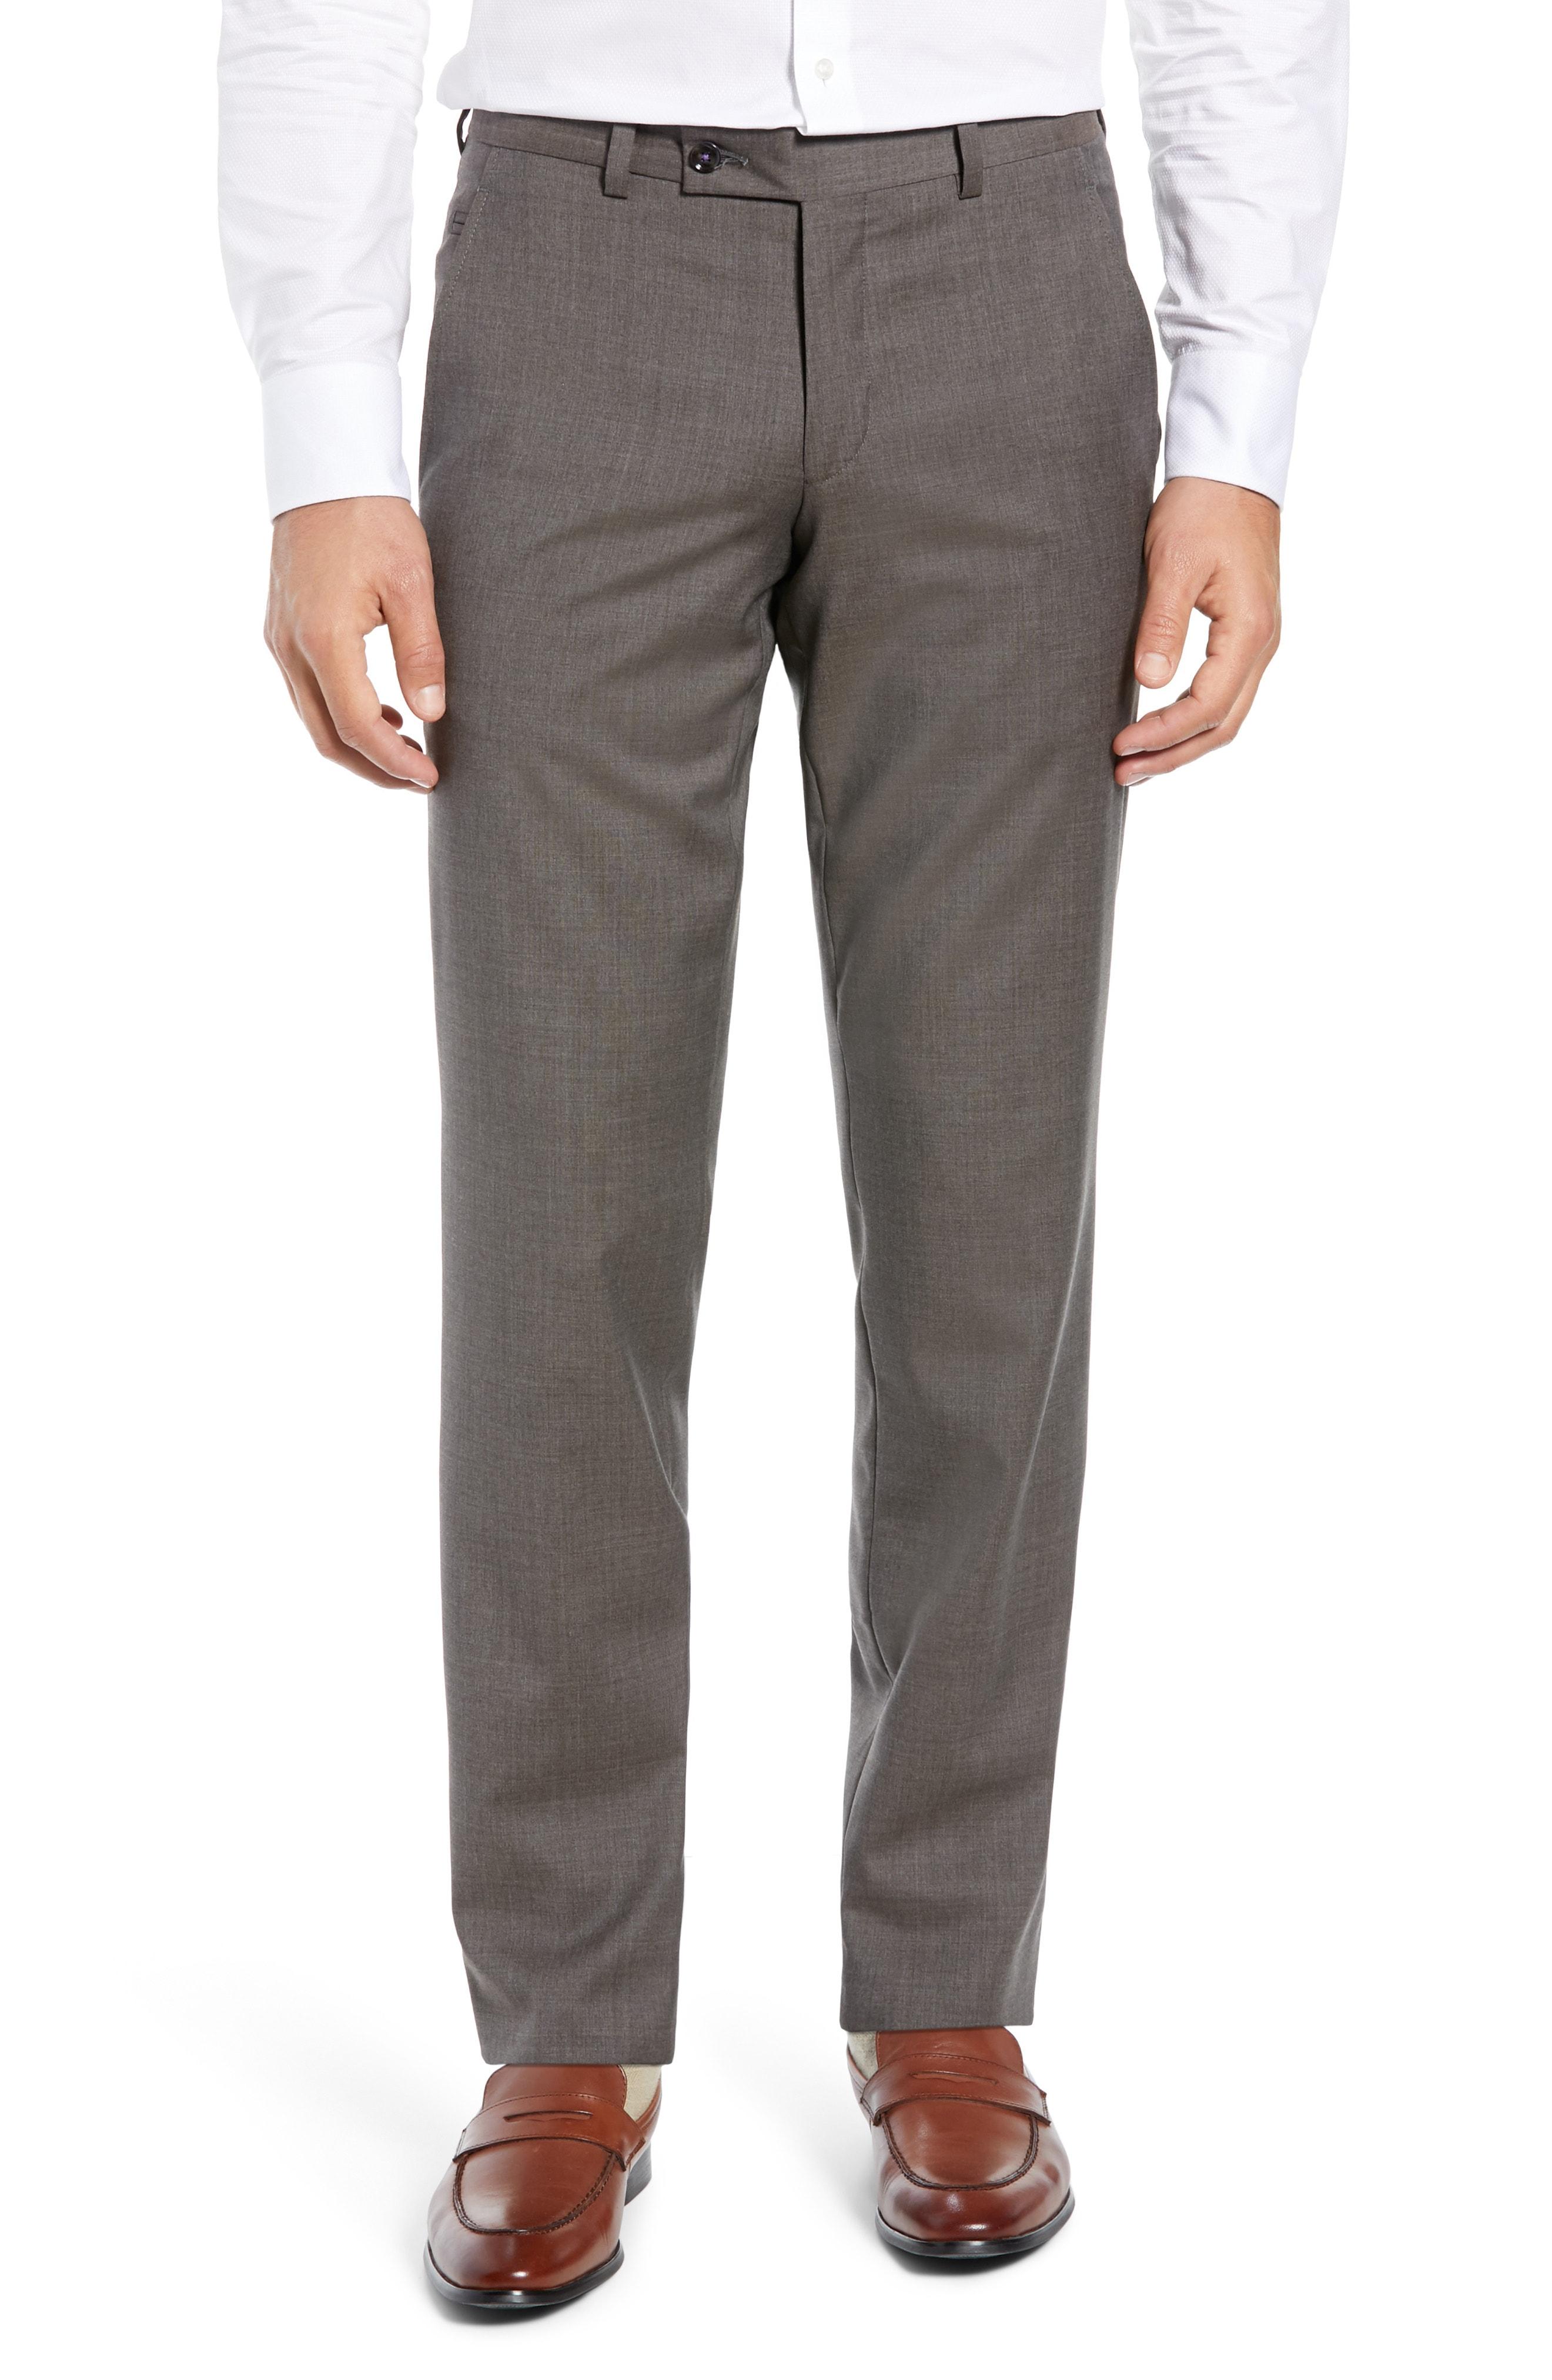 Lyst - Ted Baker Jerome Flat Front Solid Wool Trousers in Brown for Men